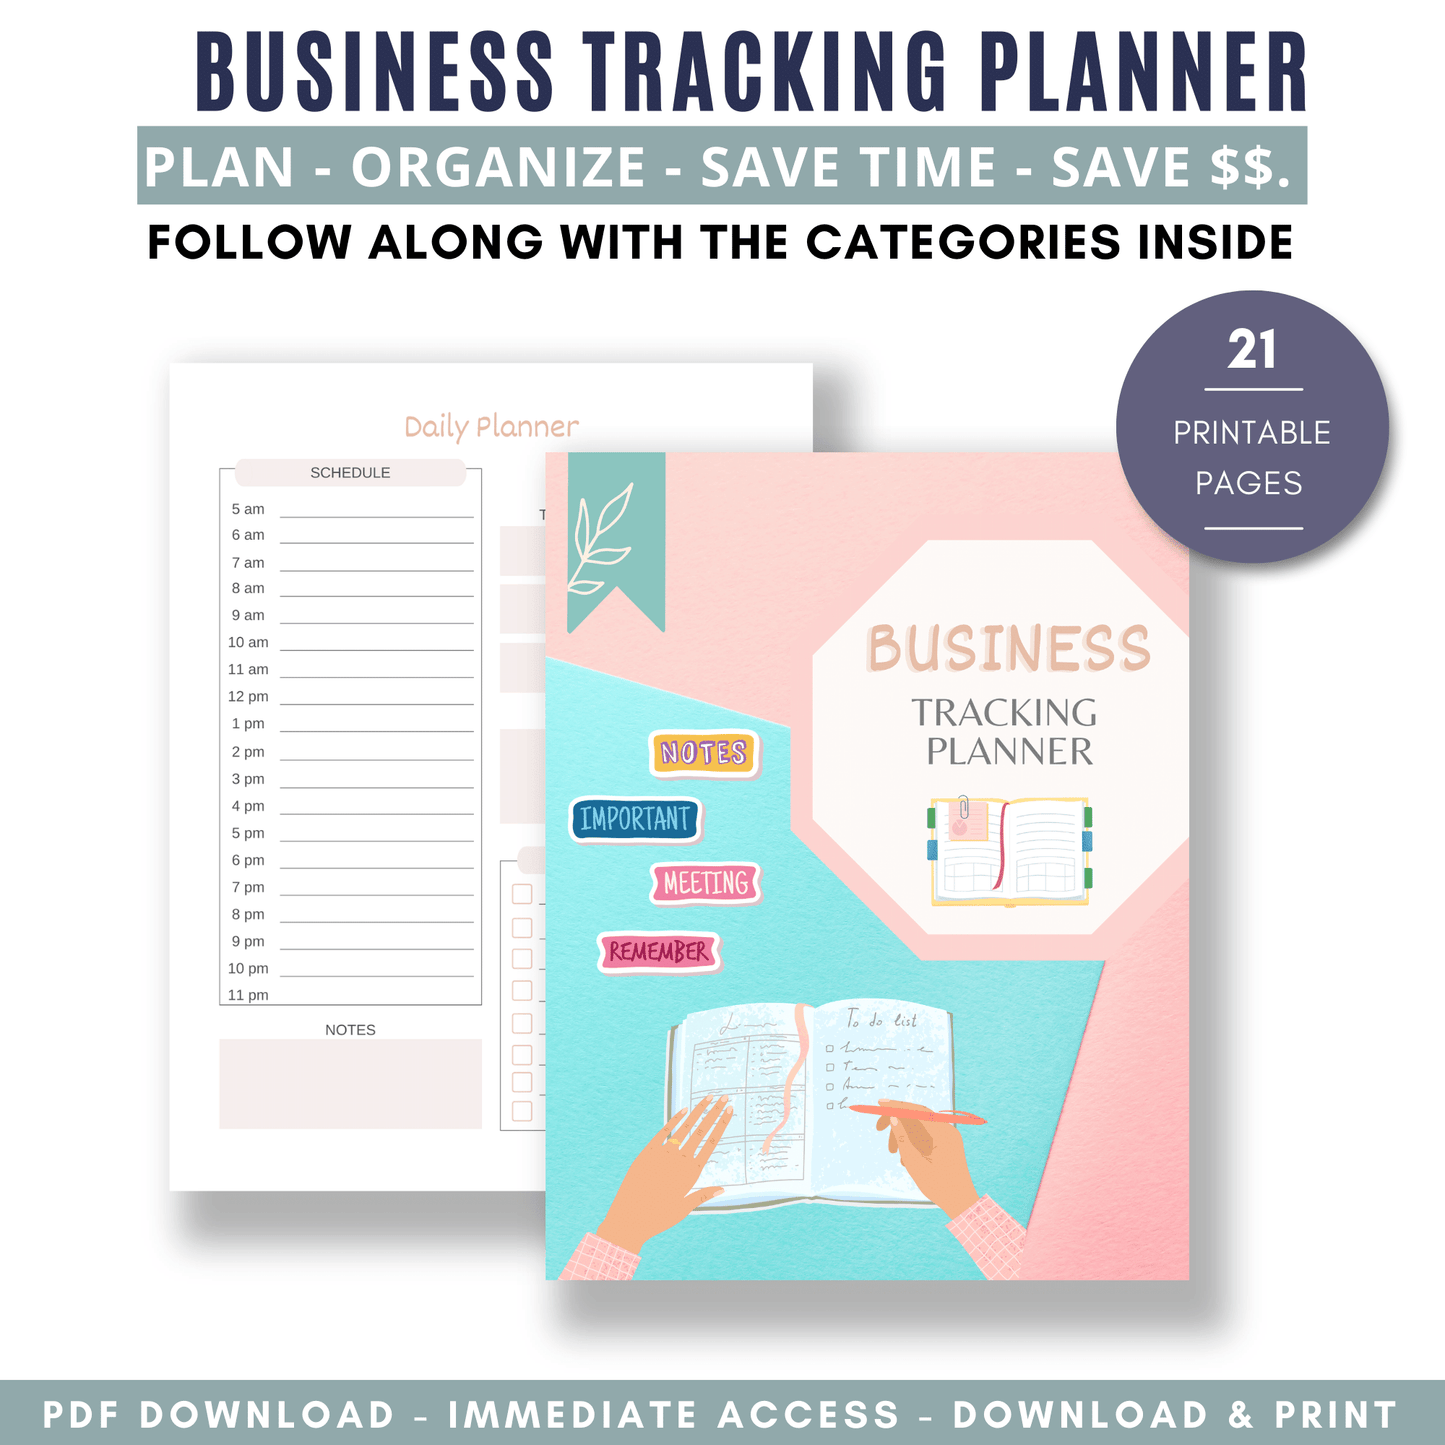 Business Tracking Planner